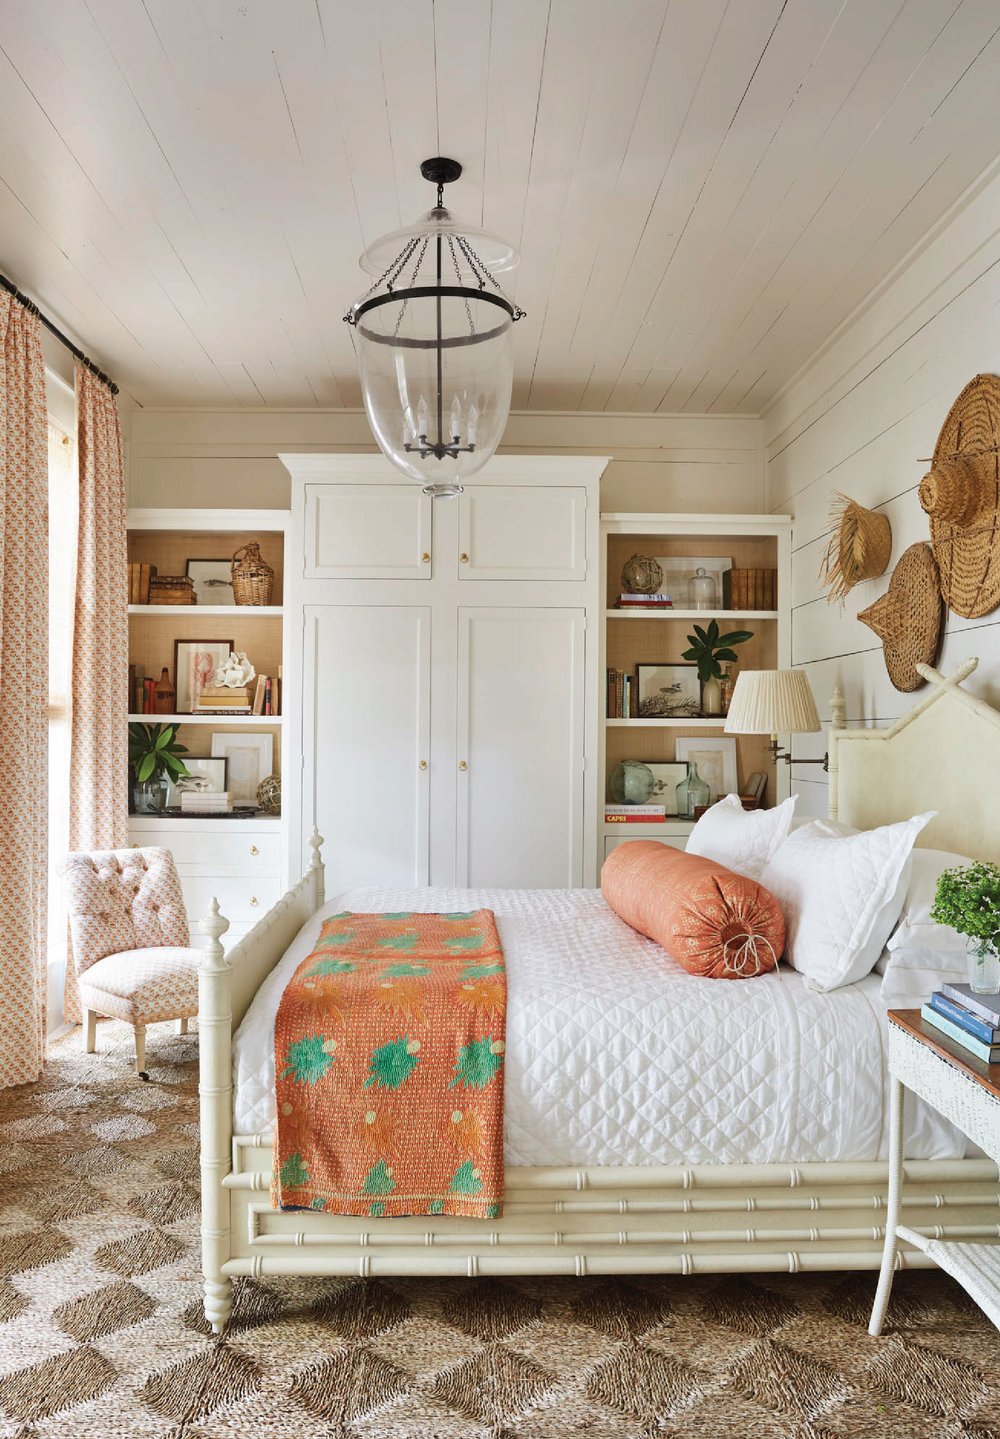 White and coral bedroom with tropical accents featured in interiors designed by Heather Chadduck